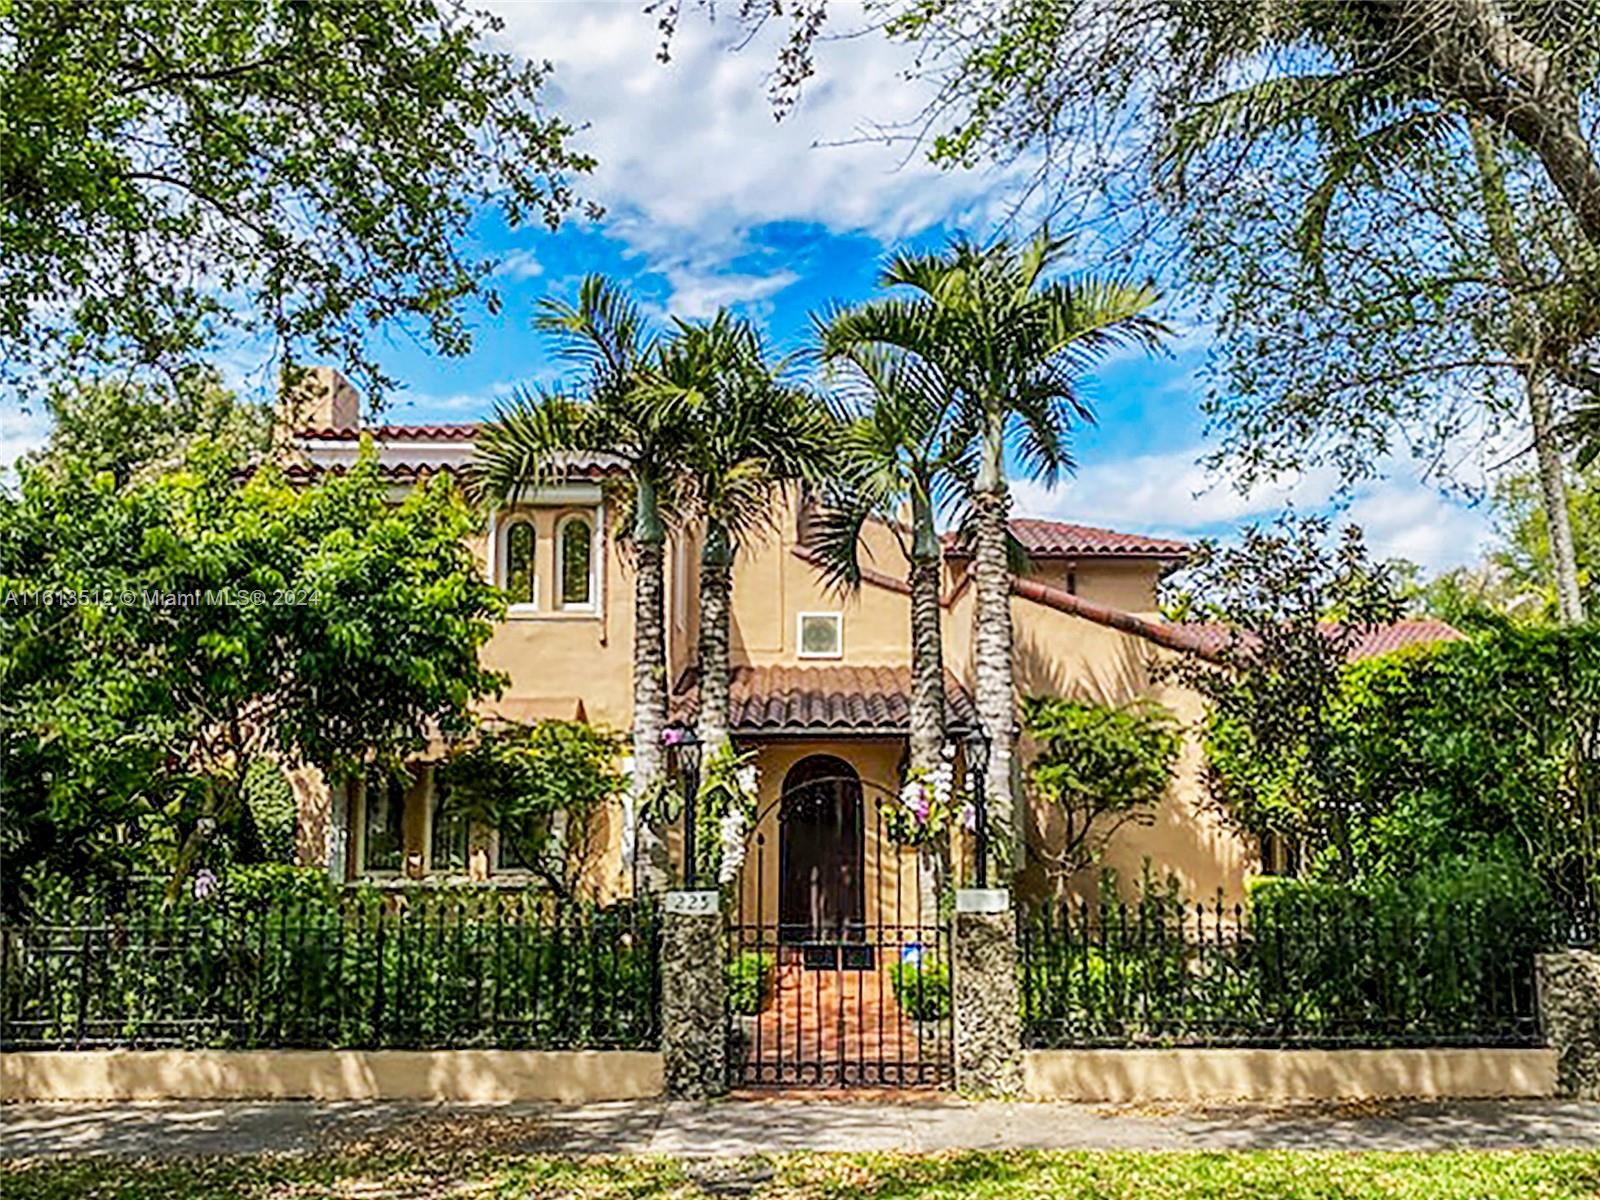 Unique,1924 Spanish Mediterranean mansion on a double lot surrounded by beautifully landscaped gardens with lush tropical vegetation, an absolute sanctuary in the best walkable location of Coral Gables.  This warm and welcoming home was built with the finest materials and craftsmanship, marble and wood floors throughout as well as arched doorways and windows, a chimney, plus a mahogany spiral staircase leading to a rooftop mirador. The chef’s kitchen has a gas stove and an extended area for entertaining. The primary bedroom suite boasts his and hers bathrooms as well as plenty of California Closets. The home has 4 bedrooms and 8 full bathrooms which could accommodate living quarters for guests or extended family. There are plenty of closets throughout including an enormous attic.